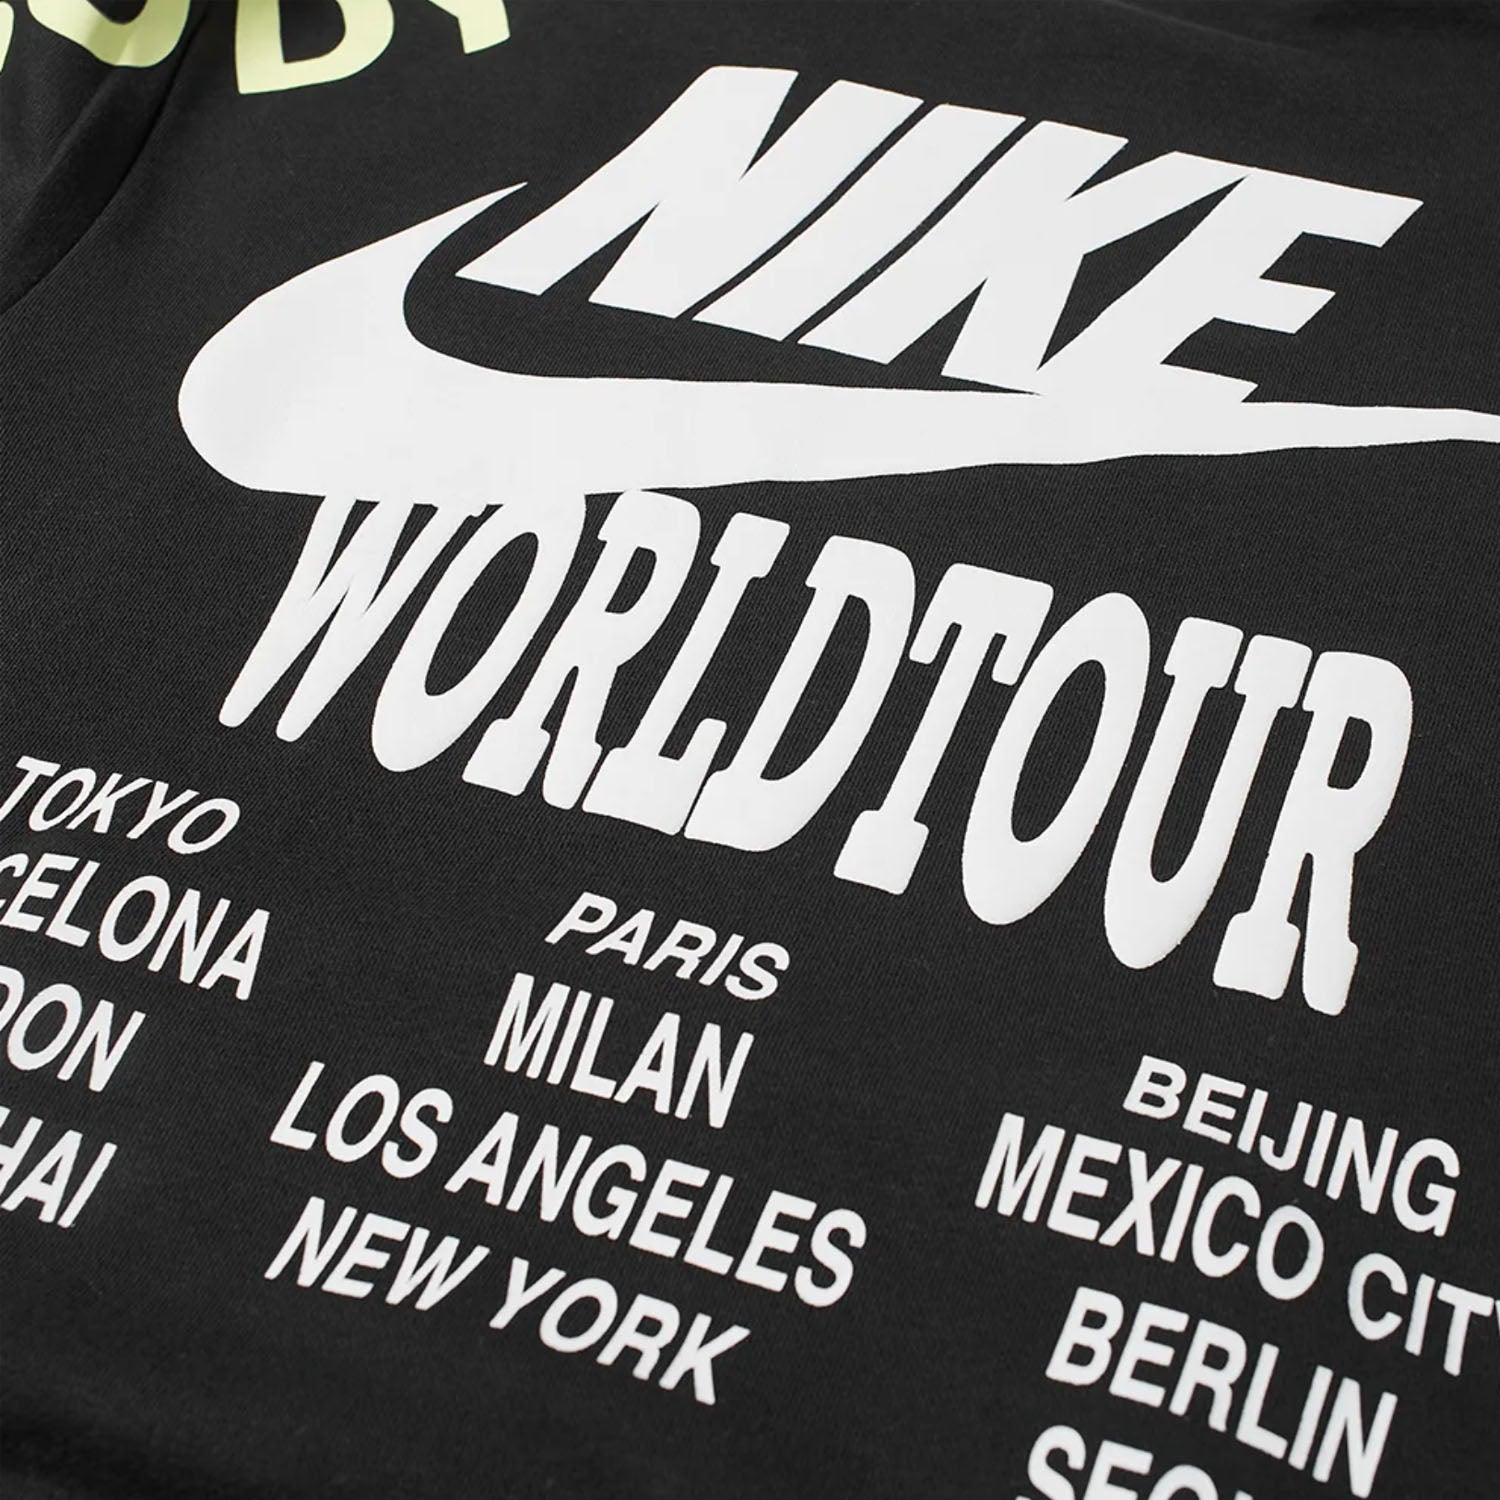 Nike Sportswear Pullover French Terry Hoodie World Tour Black